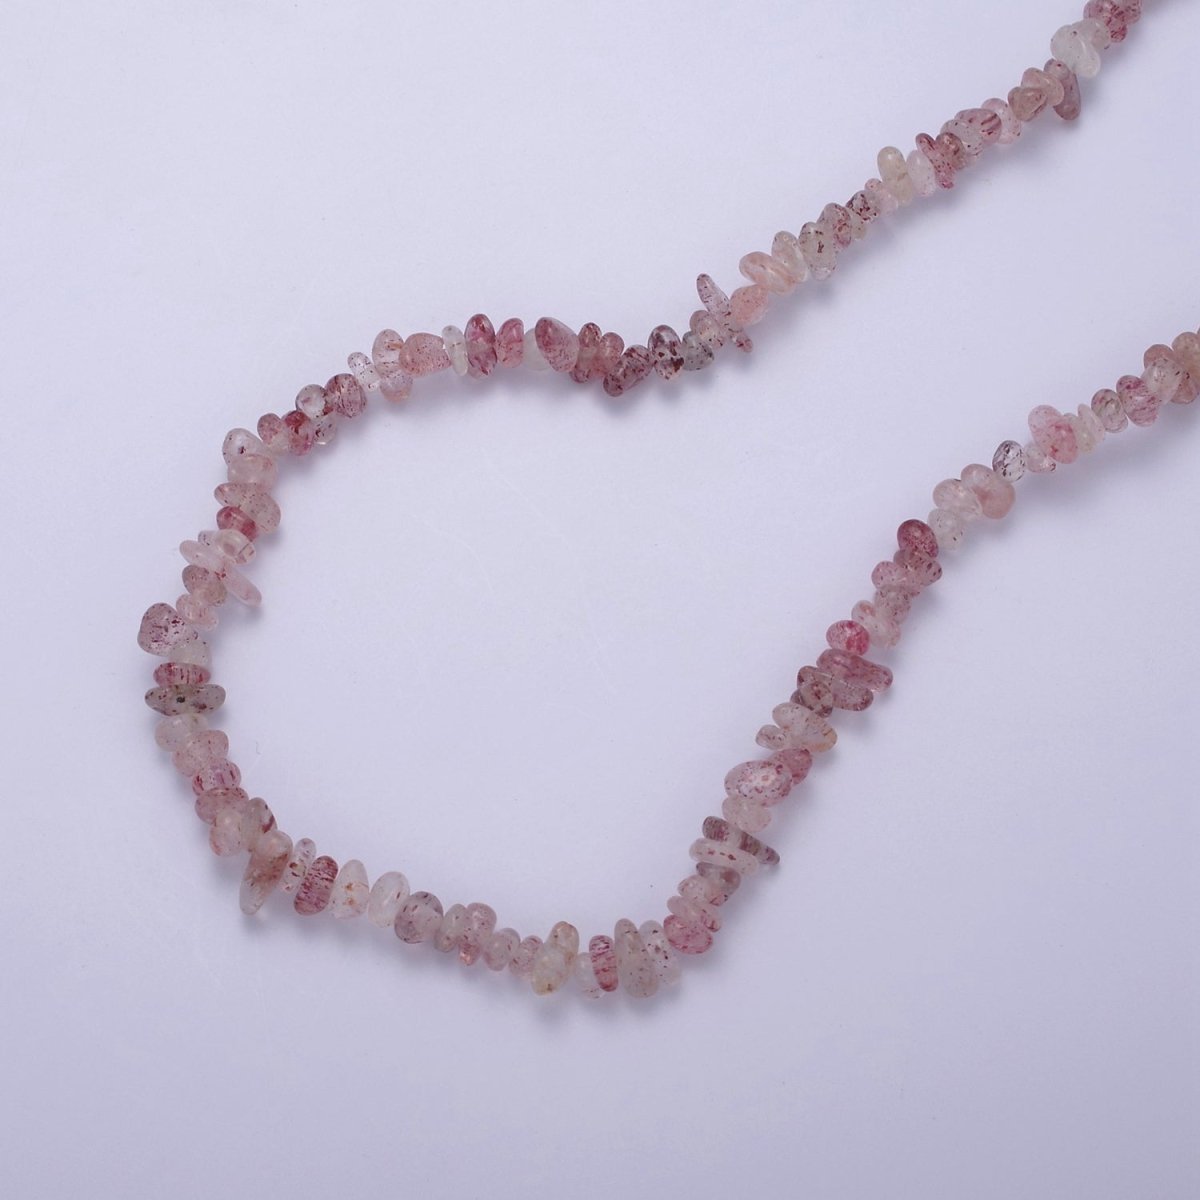 18.5 Inch Natural Pink Strawberry Quartz Crystal Stone Bead Necklace with 2" Extender | WA-632 Clearance Pricing - DLUXCA